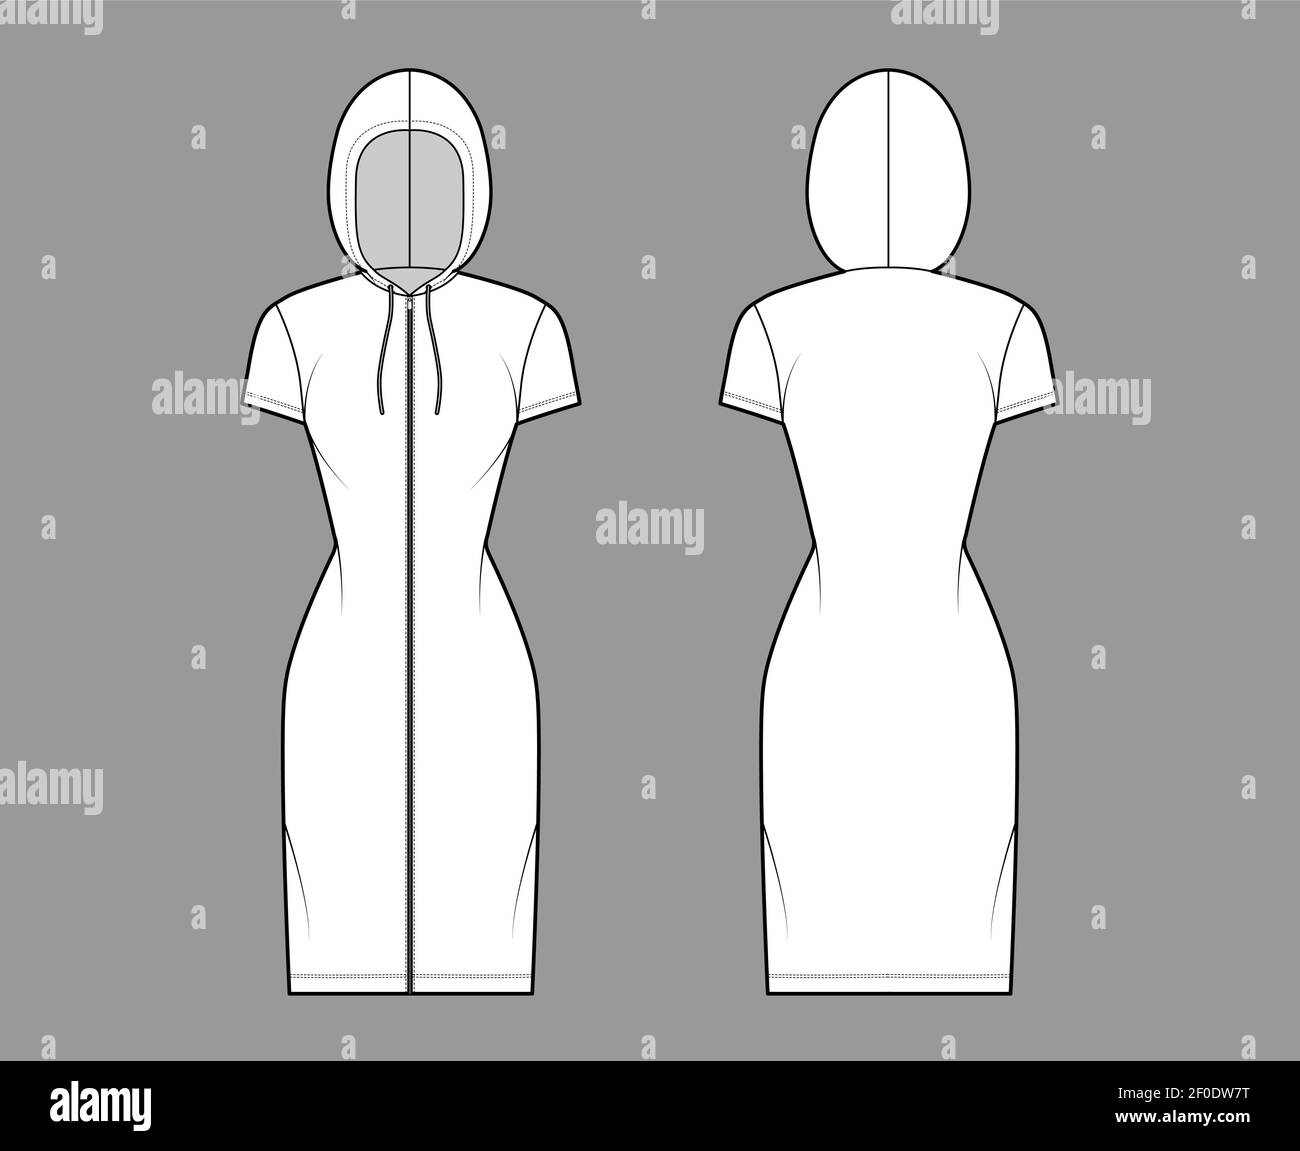 Zip-up Hoody dress technical fashion illustration with short sleeves, knee length, fitted body, Pencil fullness. Flat apparel template front, back, white color style. Women, men, unisex CAD mockup Stock Vector